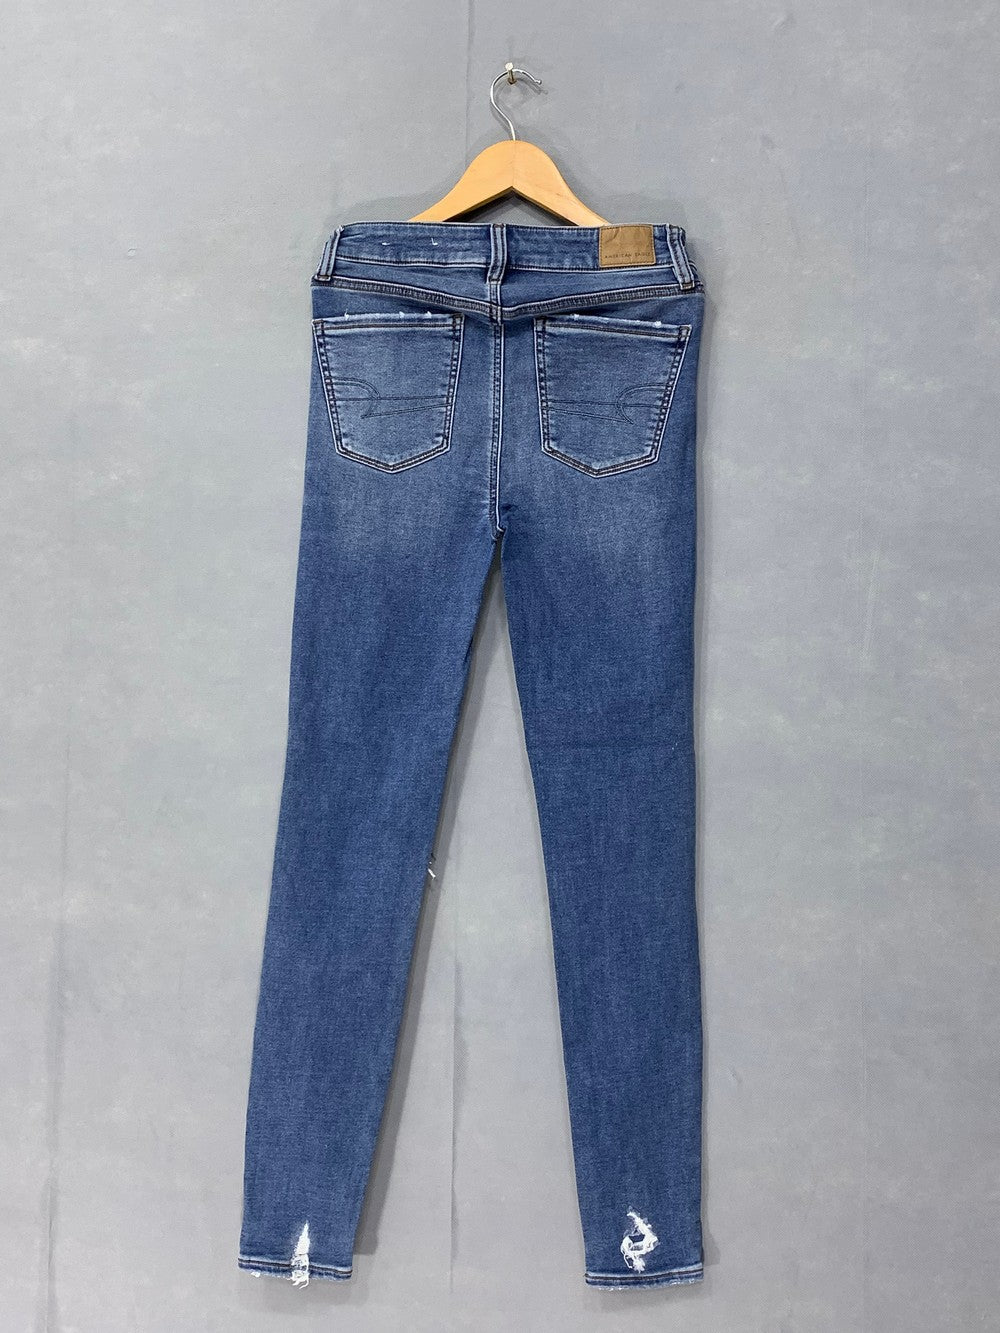 American Eagle Branded Original Jeans For Women Pant